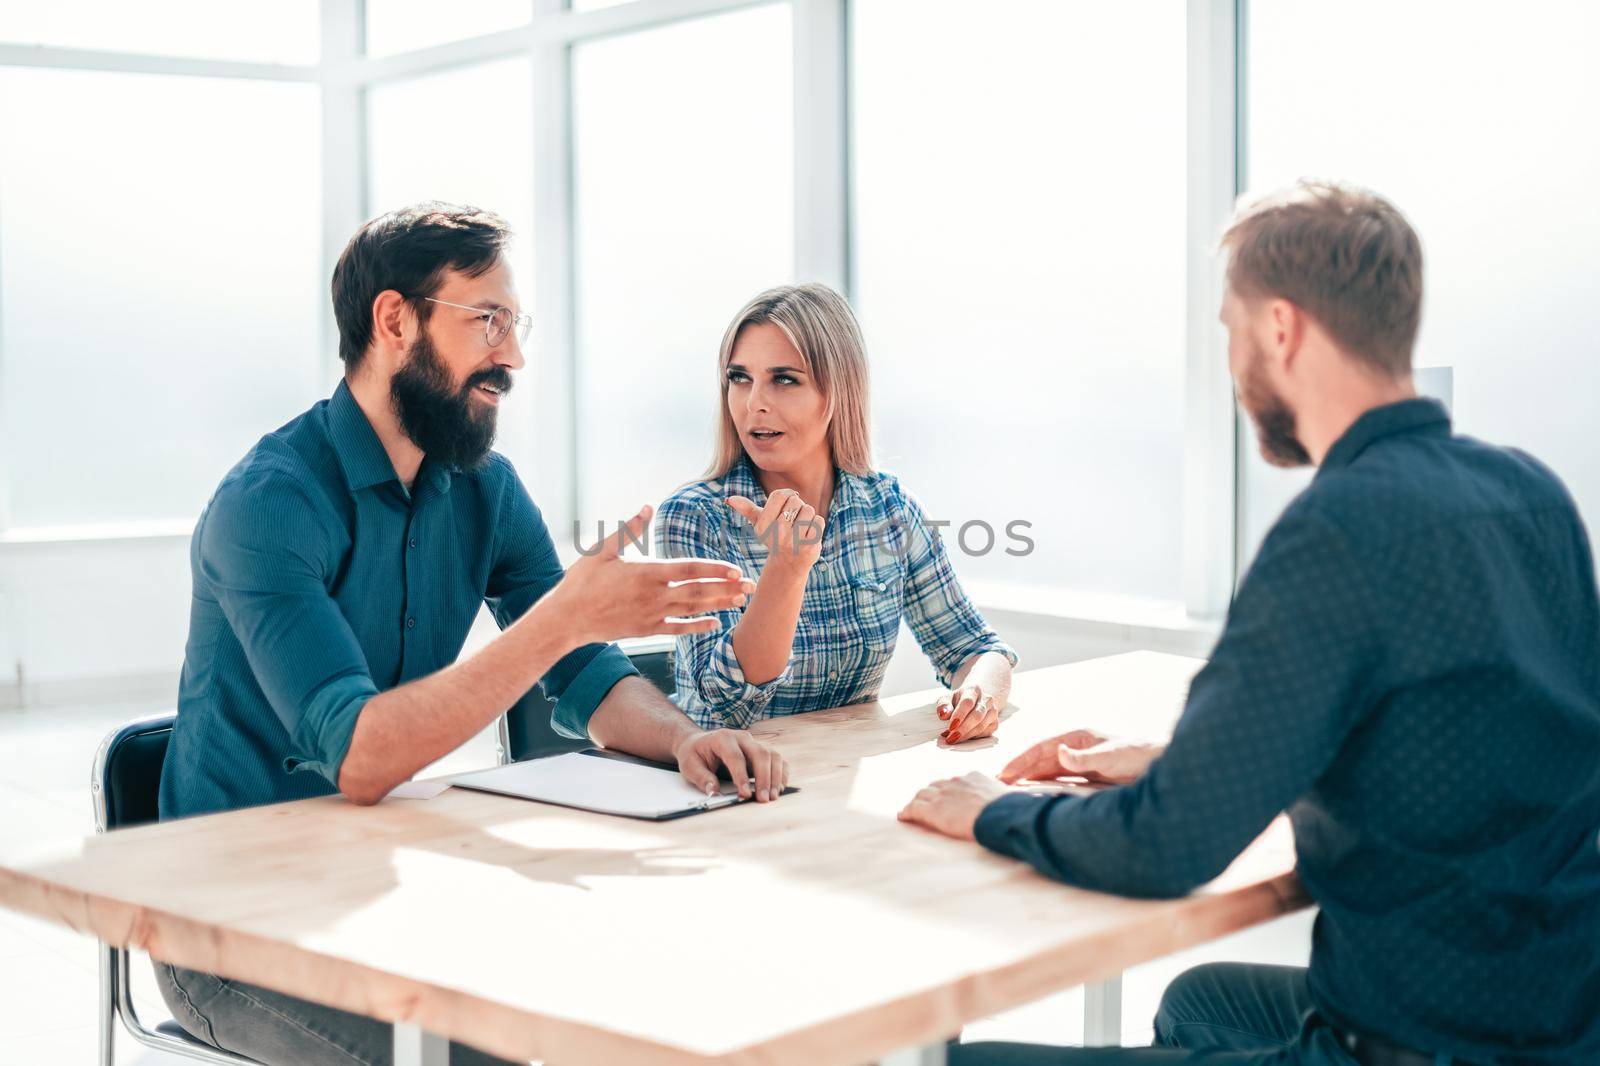 managers and job seeker sitting at the table during the interview by SmartPhotoLab